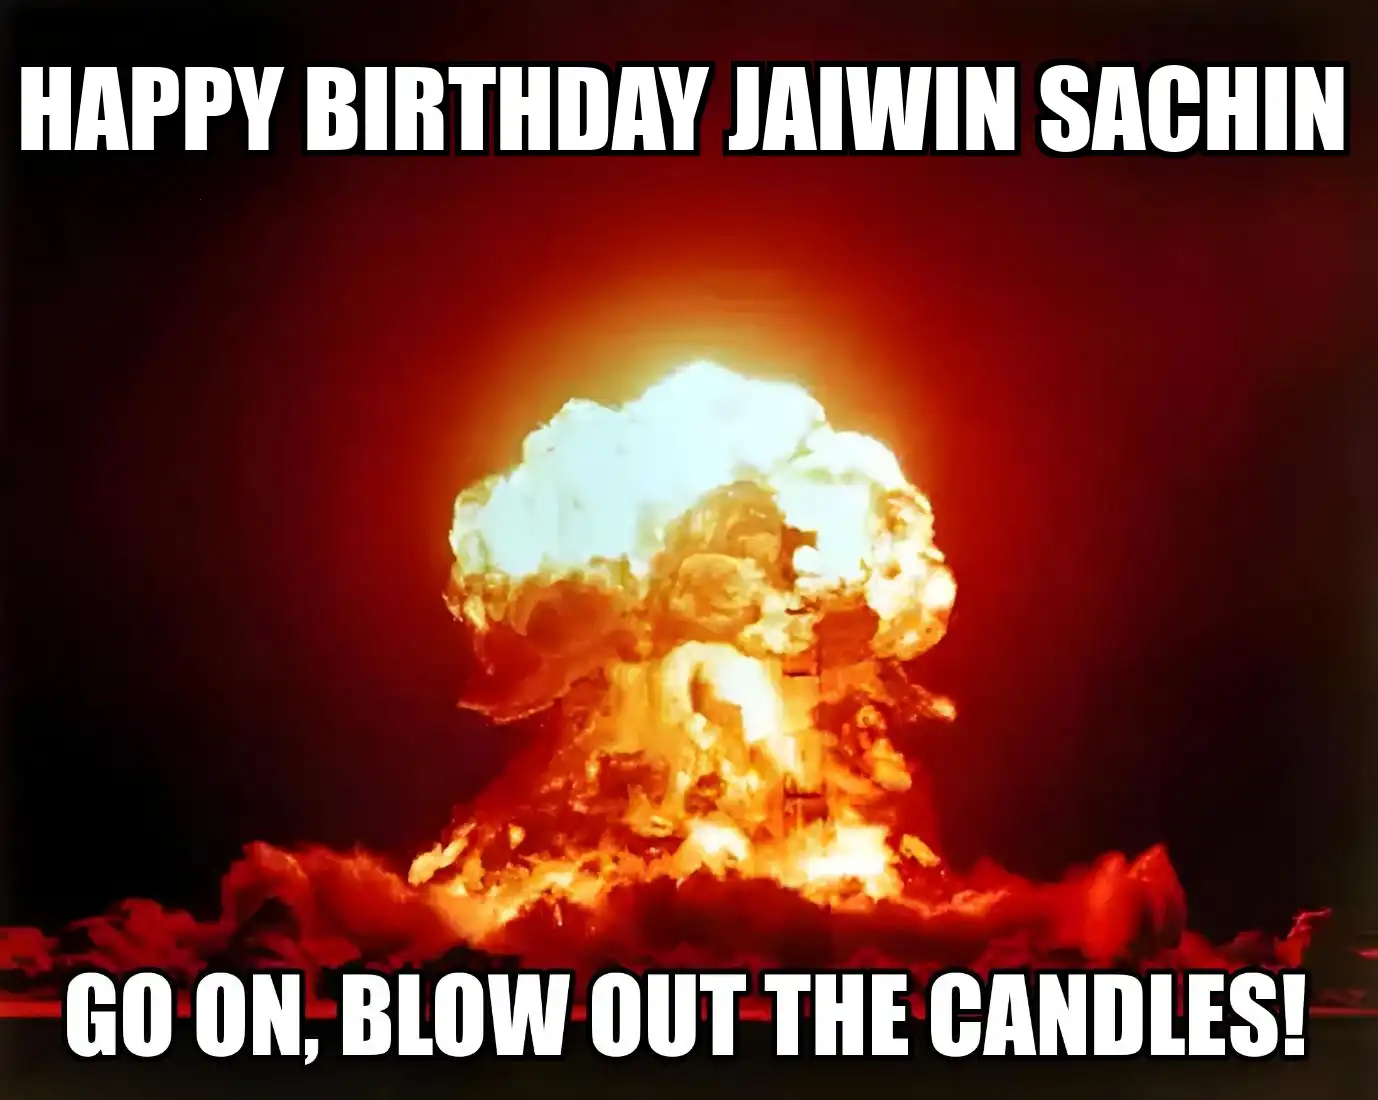 Happy Birthday Jaiwin sachin Go On Blow Out The Candles Meme